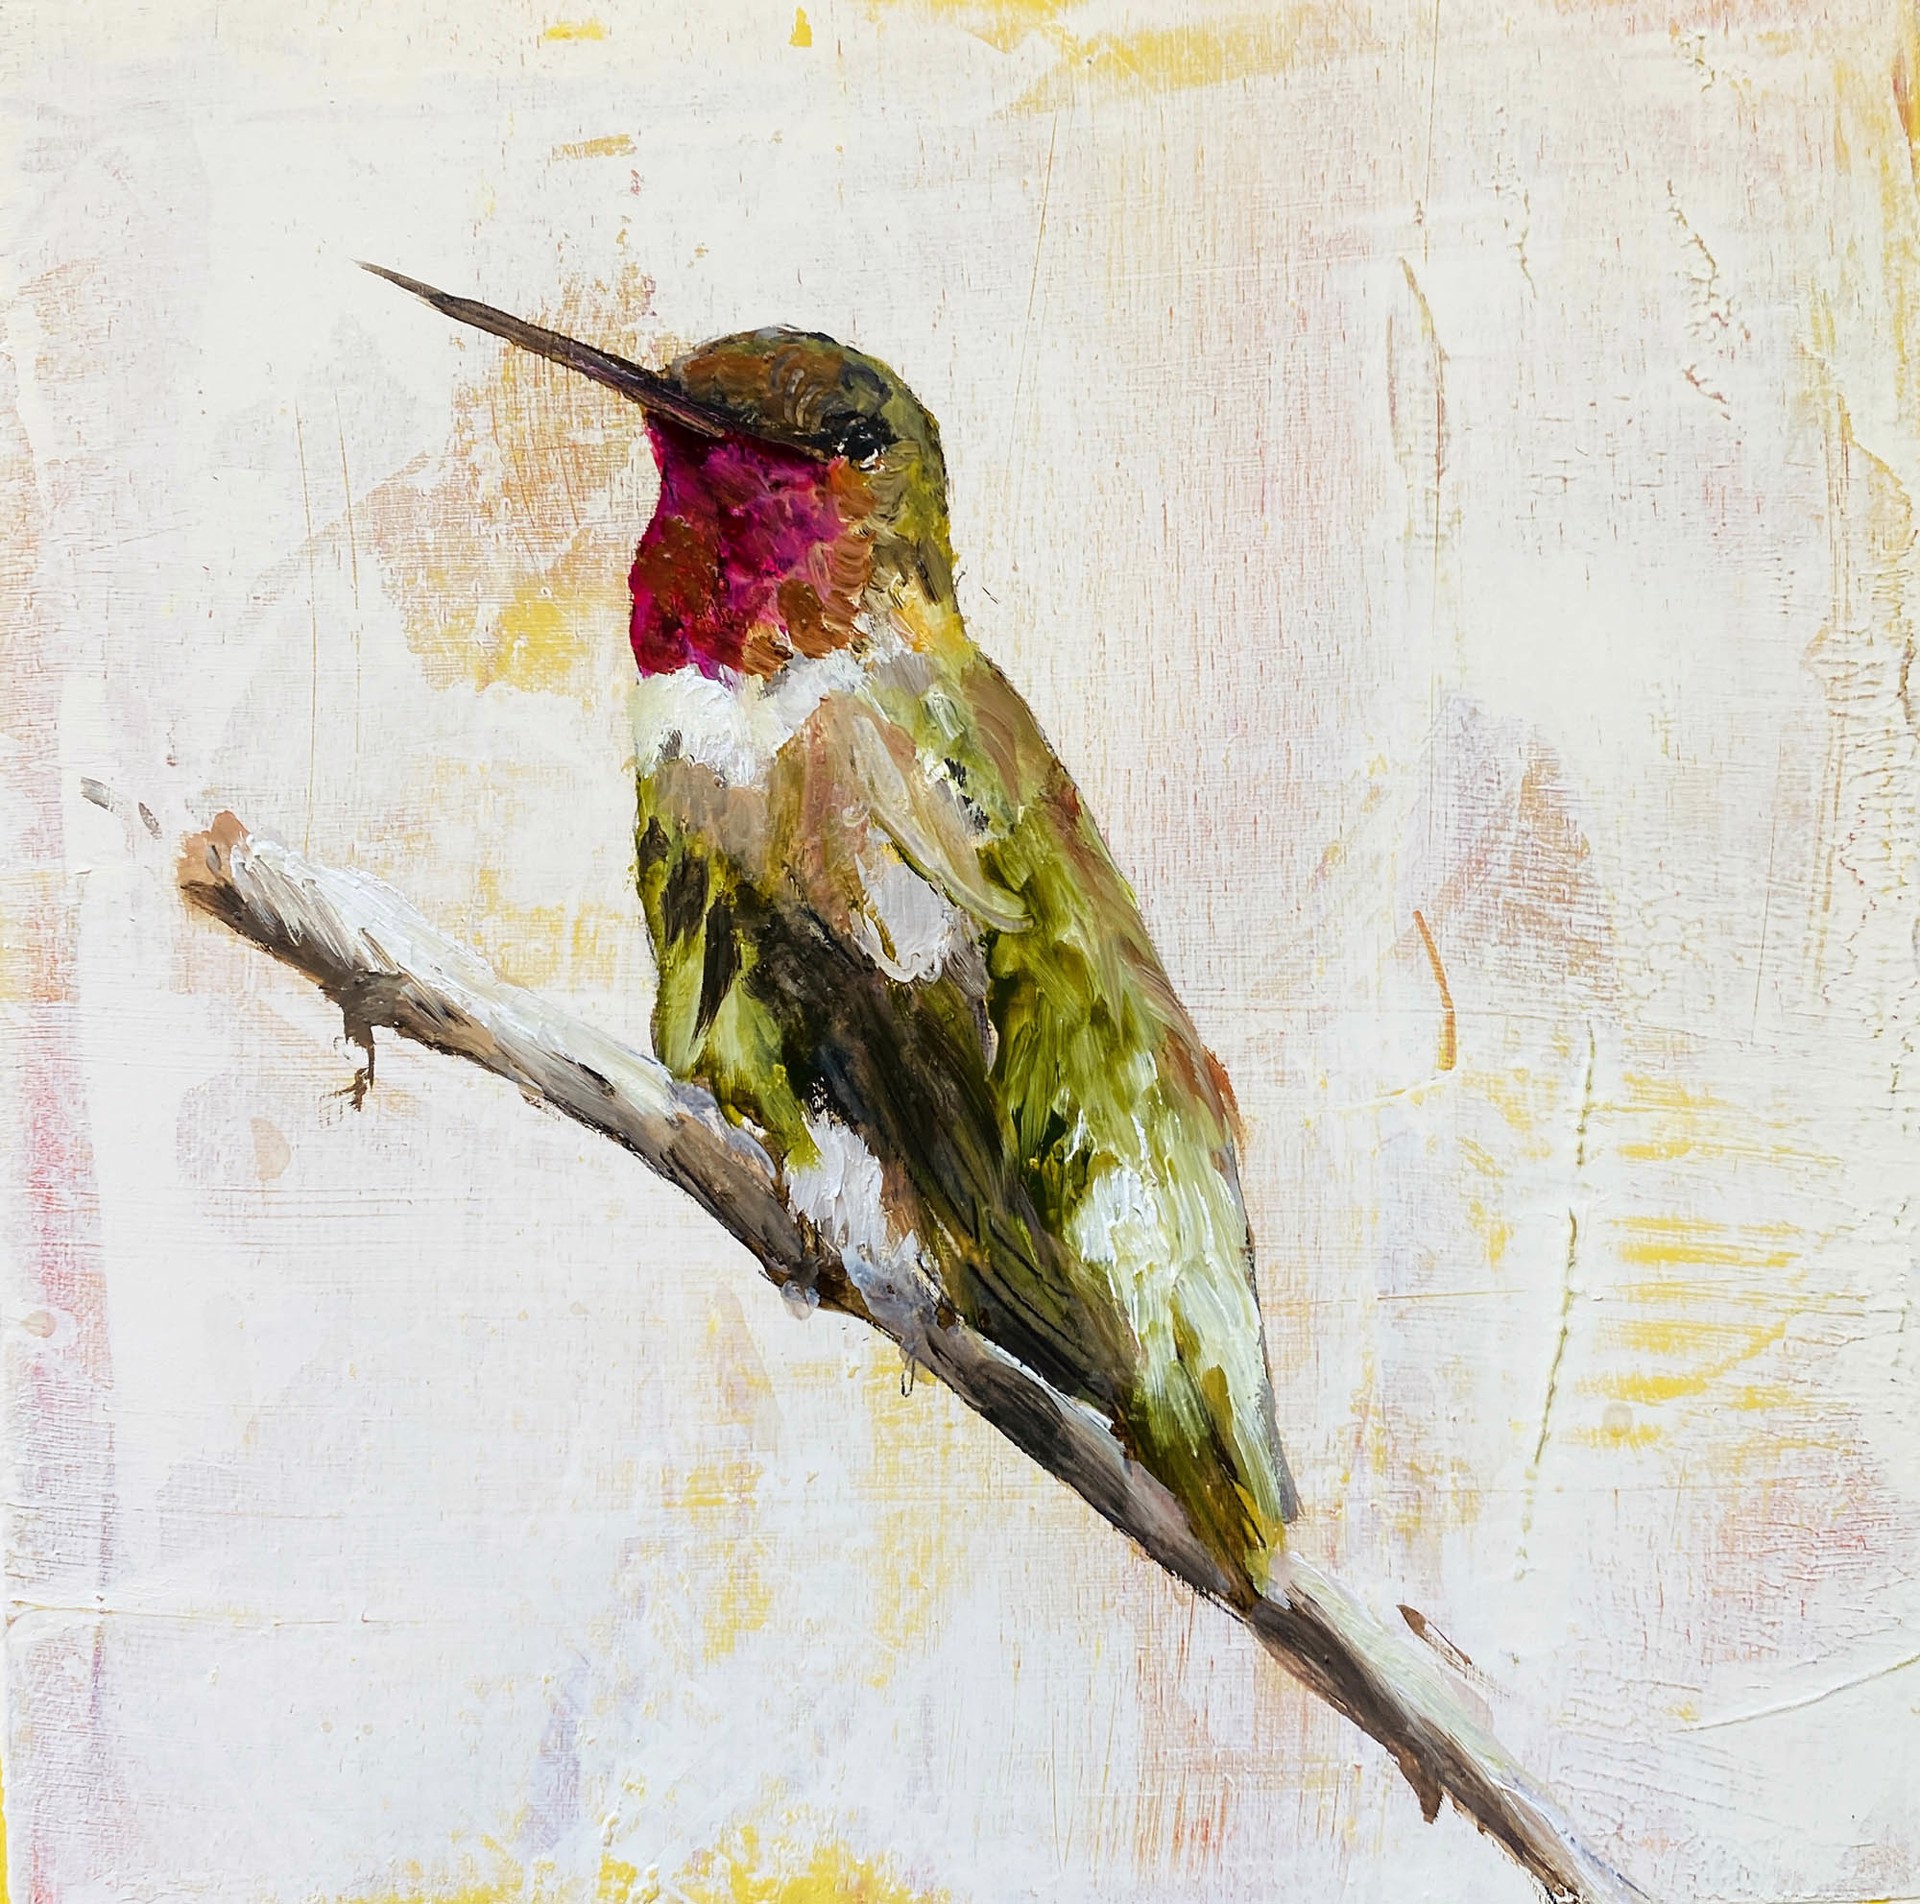 Original Oil Painting featuring A Single Hummingbird On A Branch Over Abstract Pink And Yellow Background